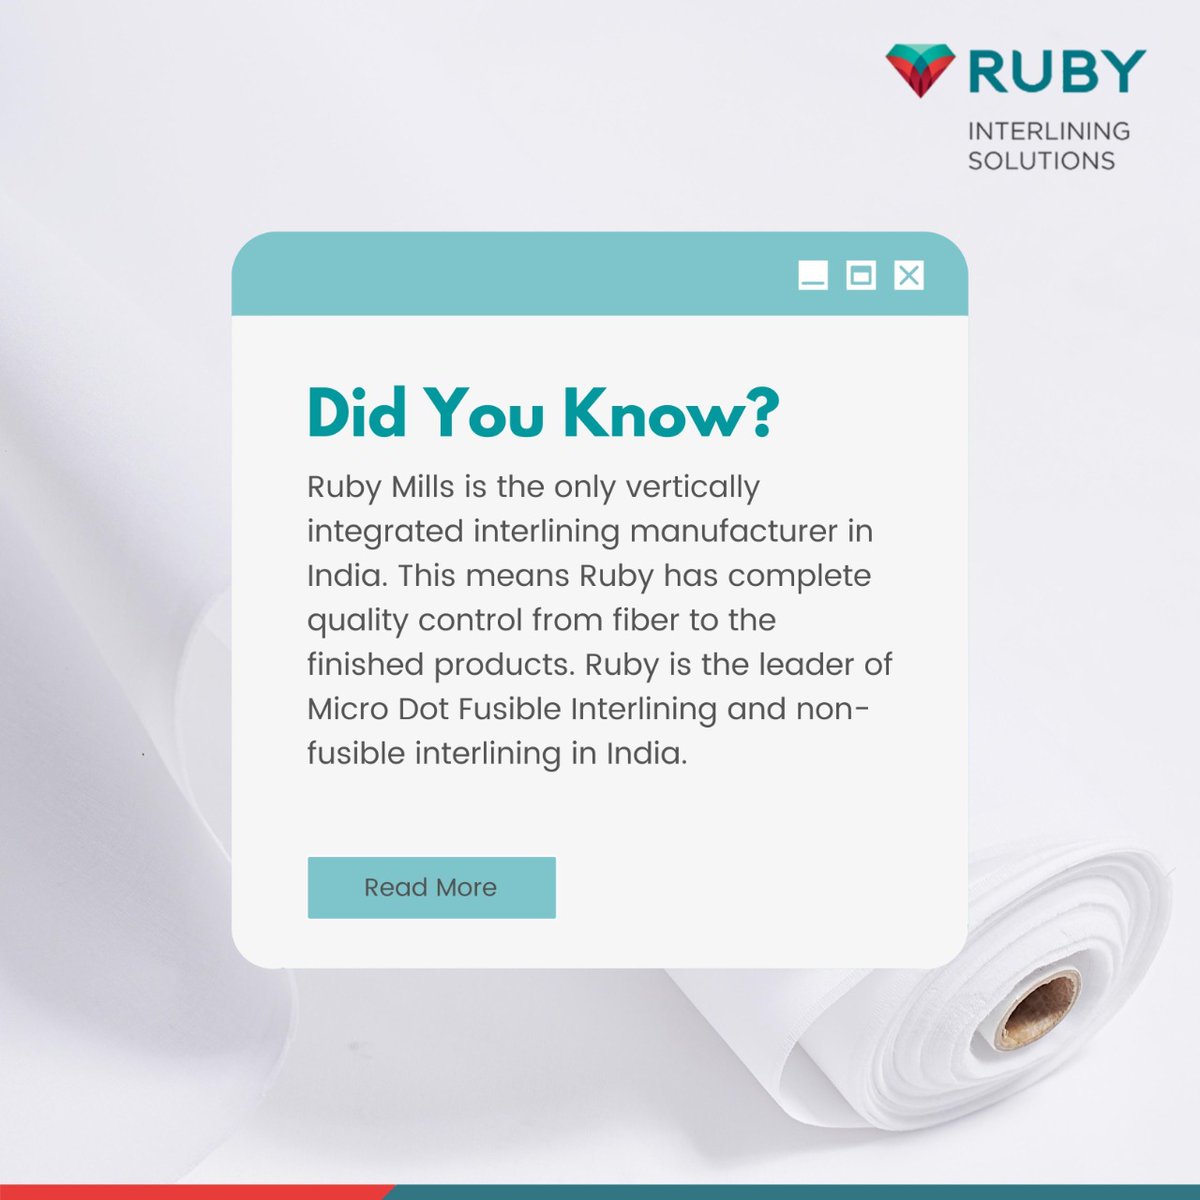 Powered by the world-class interlining technology coupled with deep application expertise, Interlining Solutions from The Ruby Mills are a range of reliable end-to-end offerings.
#RubyMills #TheRubyMills #ATouchOfRuby #ACutAbove #textilemill #textilesindia #textile #compositemill